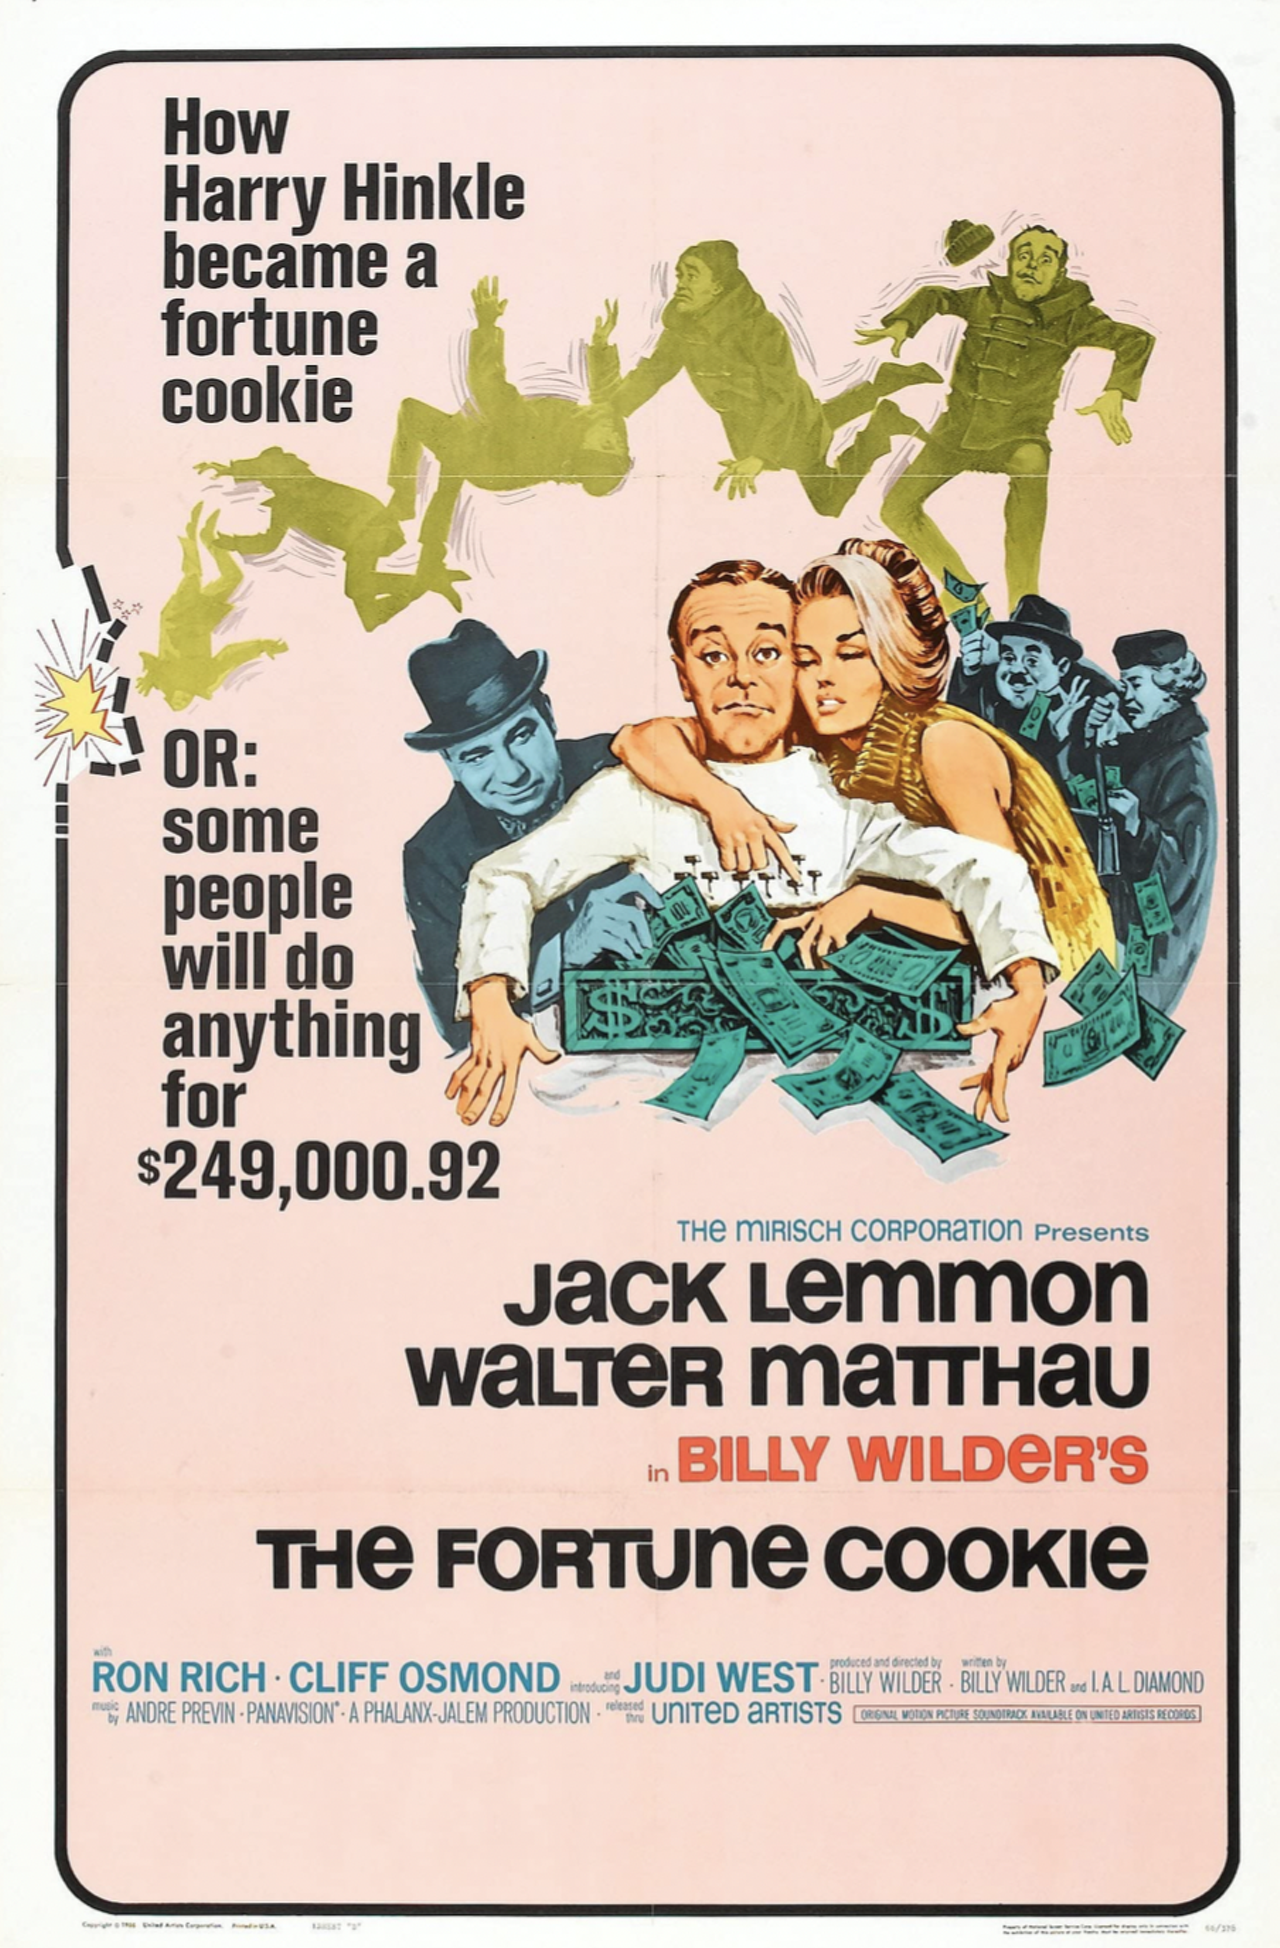   The Fortune Cookie  (1966) 
Not many classic films were filmed in Cleveland, but this Jack Lemmon-led rom-com used three main locations downtown, including Municipal Stadium (now serving as a man-made barrier reef in Lake Erie). The film is currently streaming on Tubi and Kanopy.